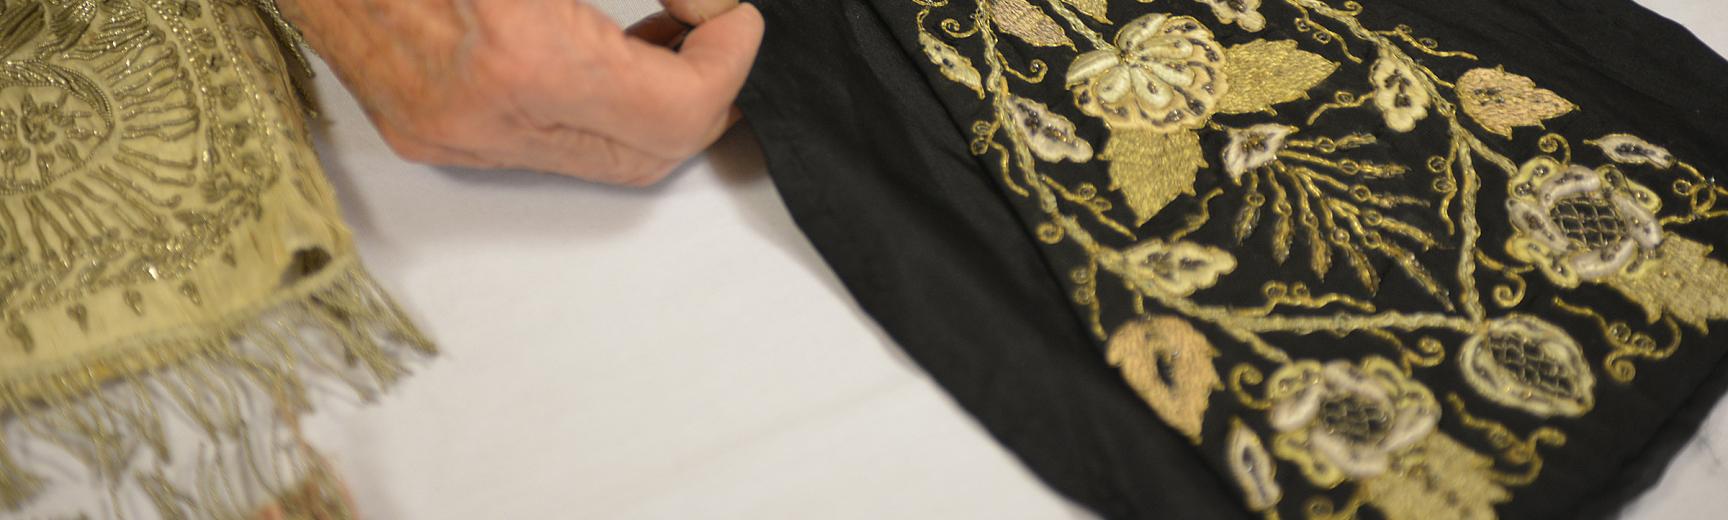 Hands holding a piece of black textile with golden embroidery